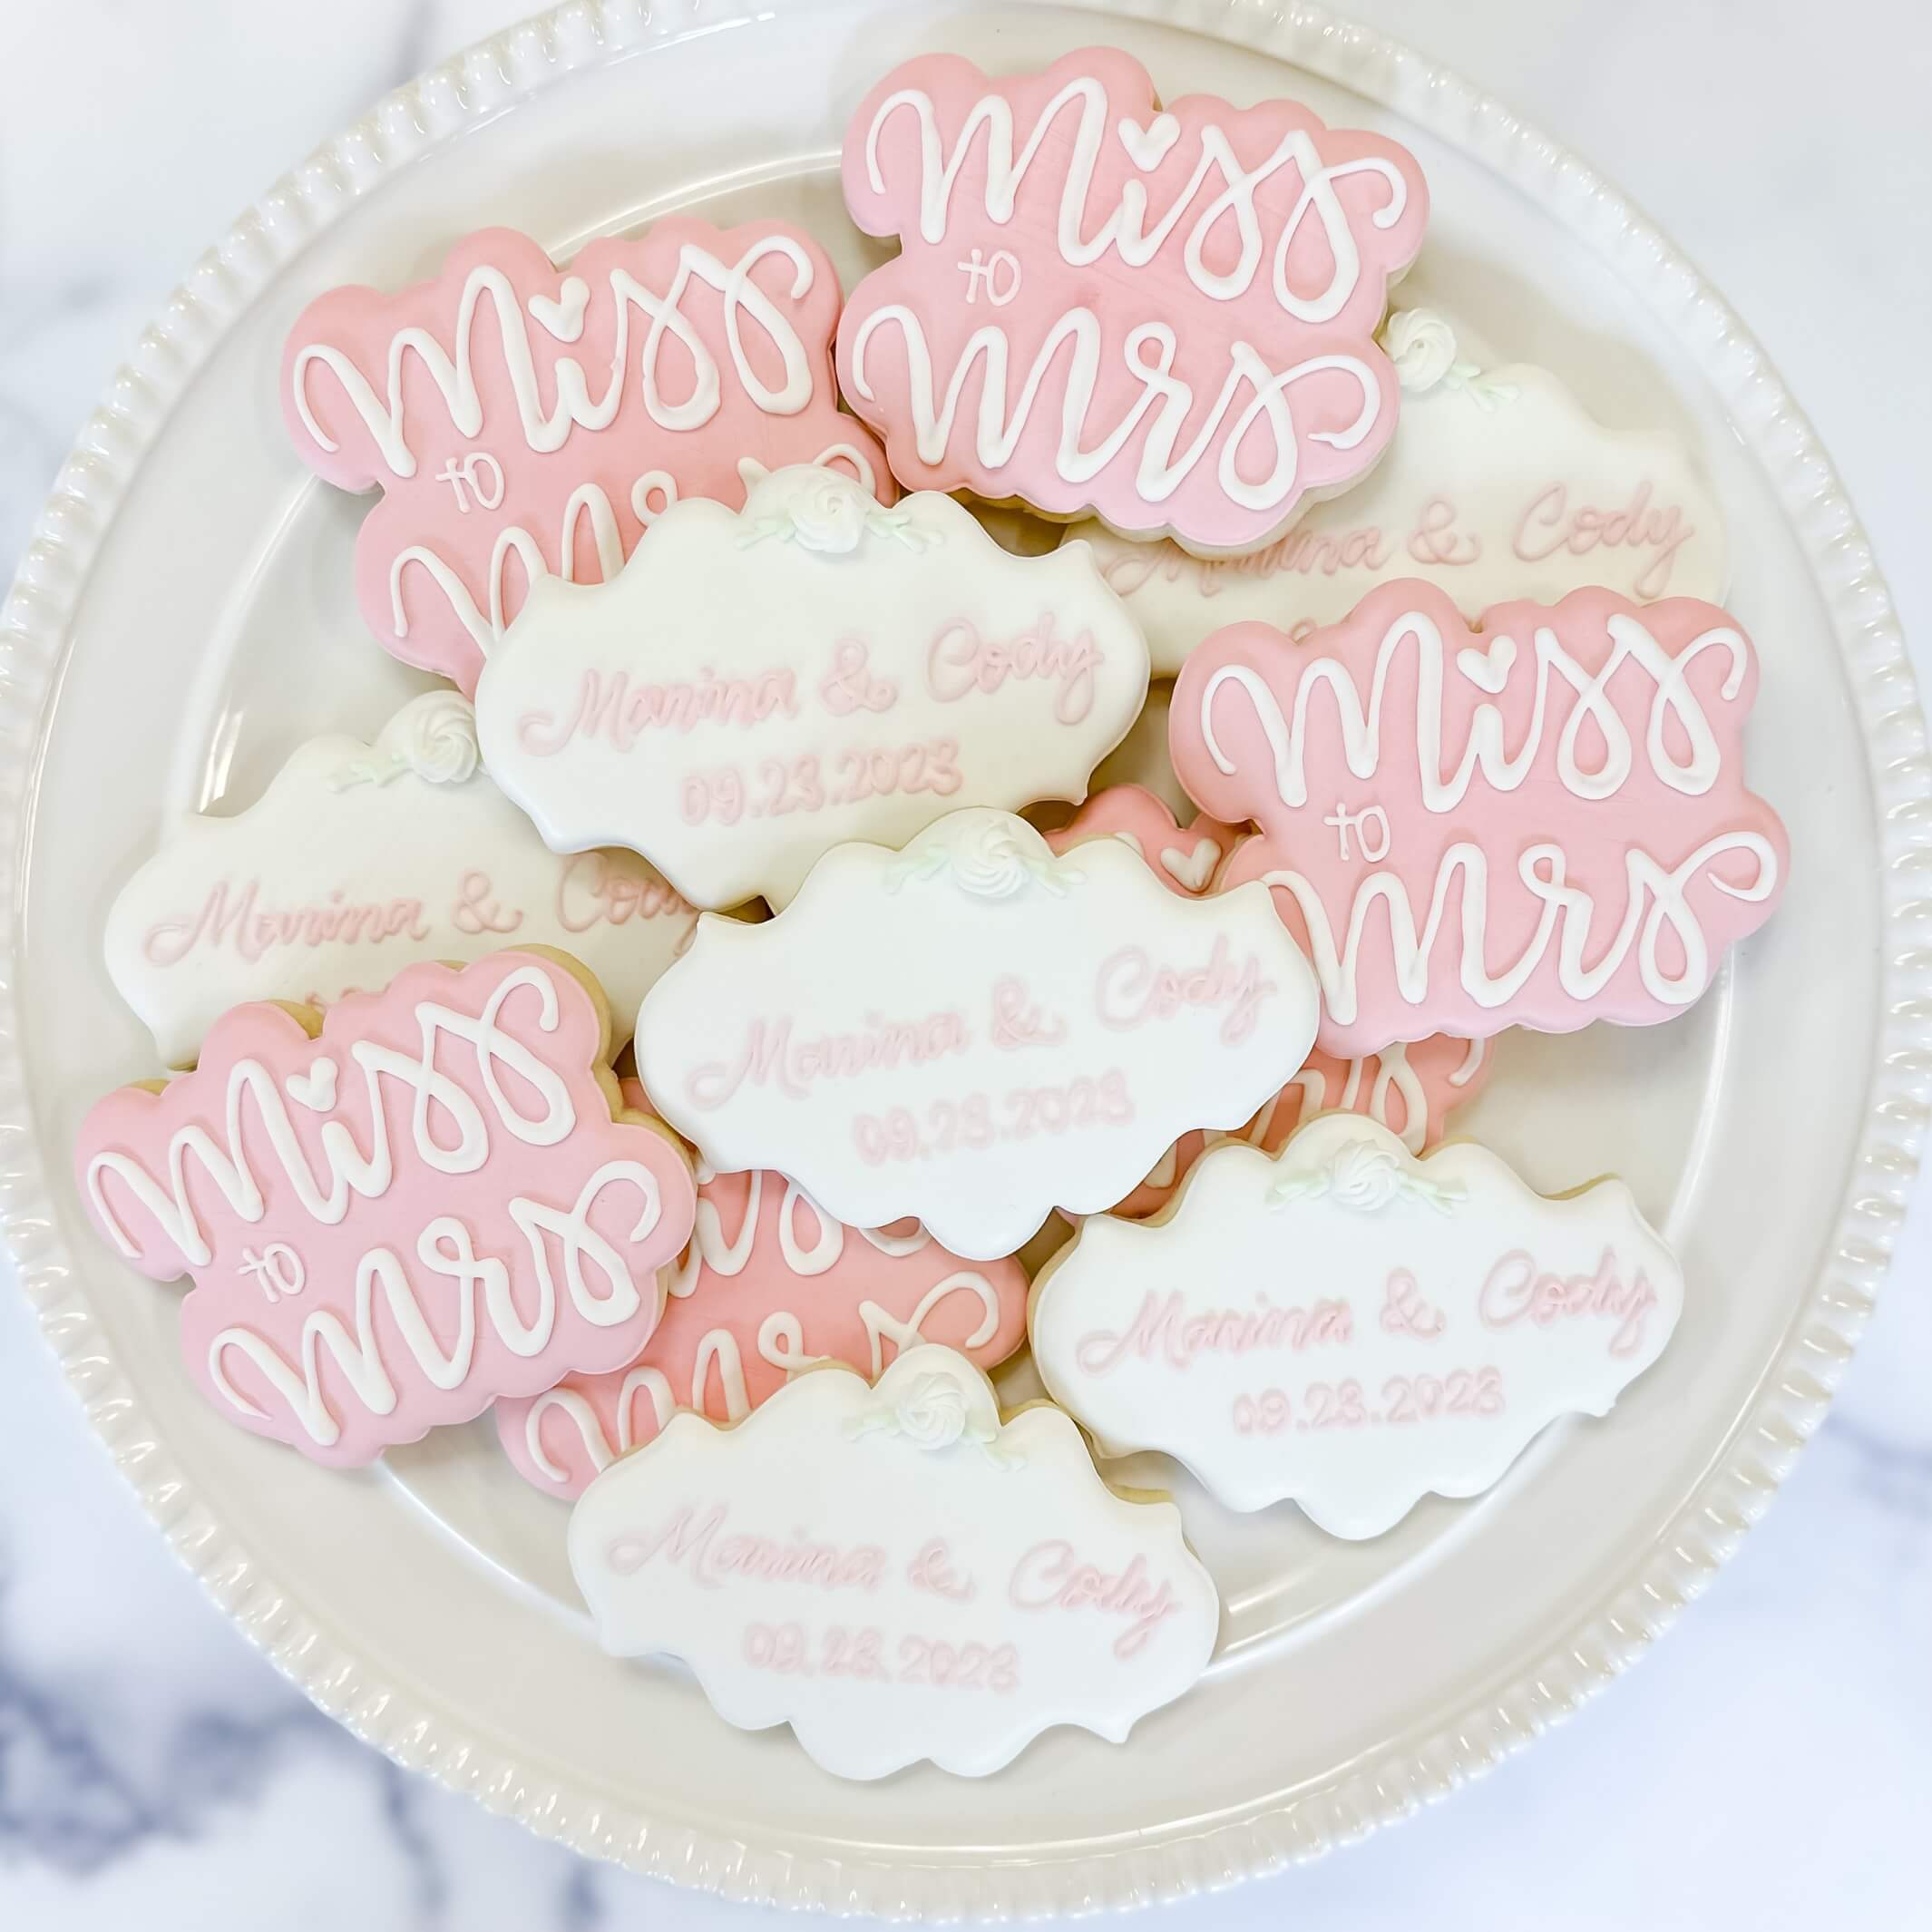 50 Bridal Shower Gifting Ideas for Your Favorite Bride-to-Be - Edible® Blog